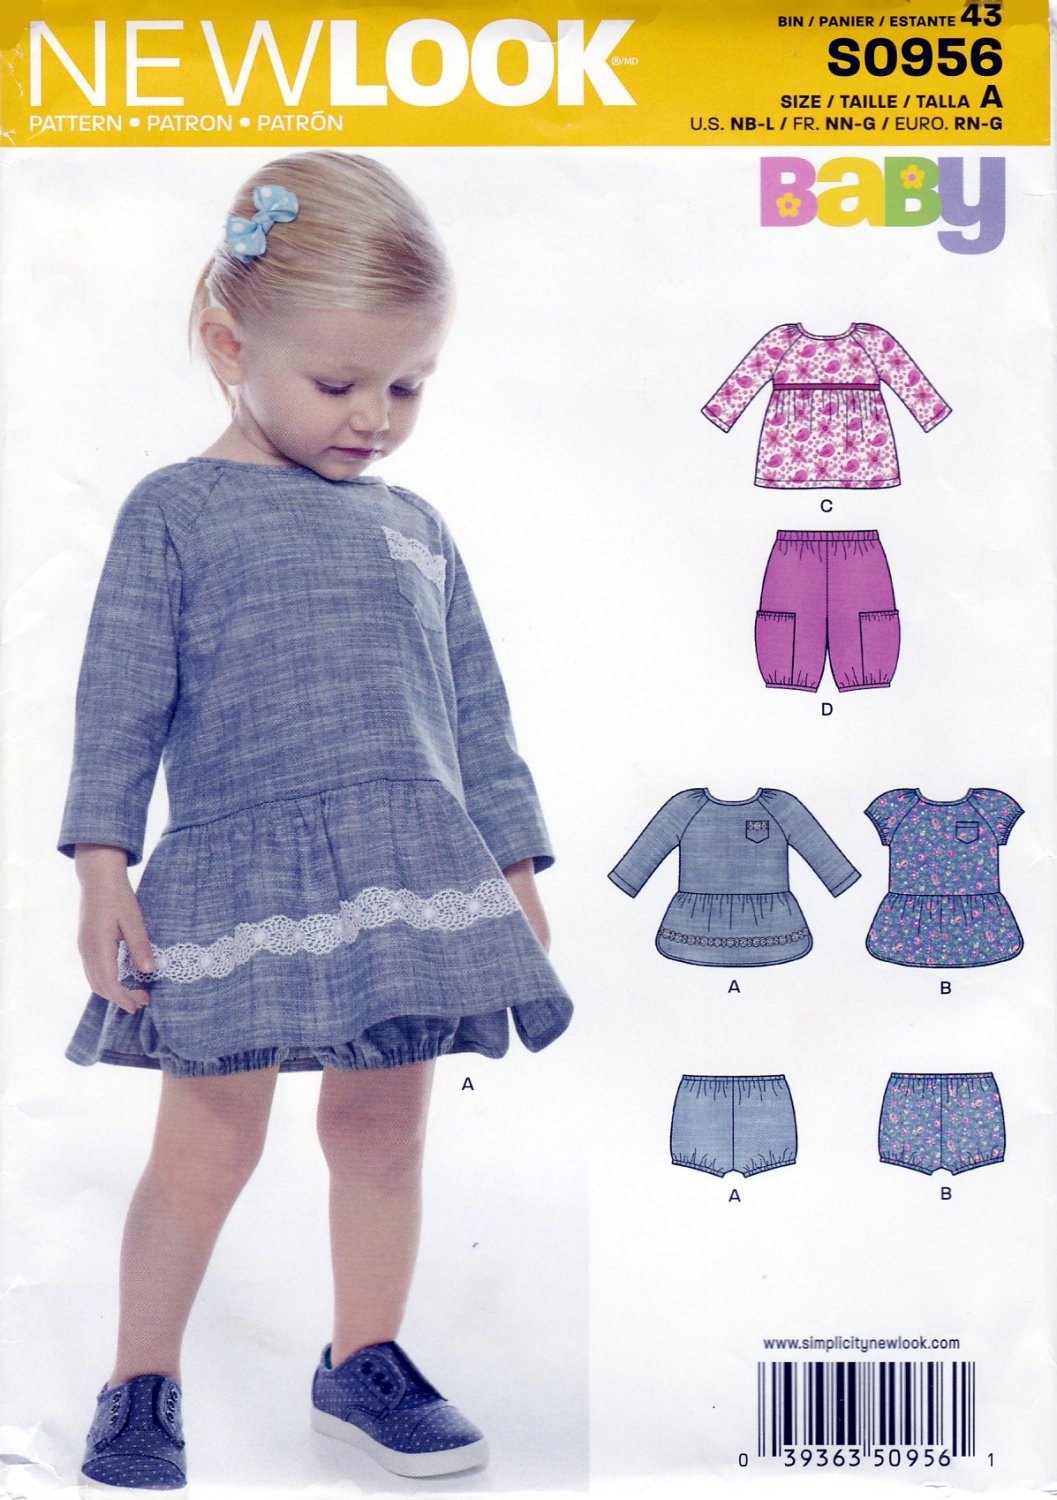 New Look S0956 6484 Babies Girls 4 Sizes in One Tops Bloomers Dress Pants Sewing Pattern Sizes NB-L